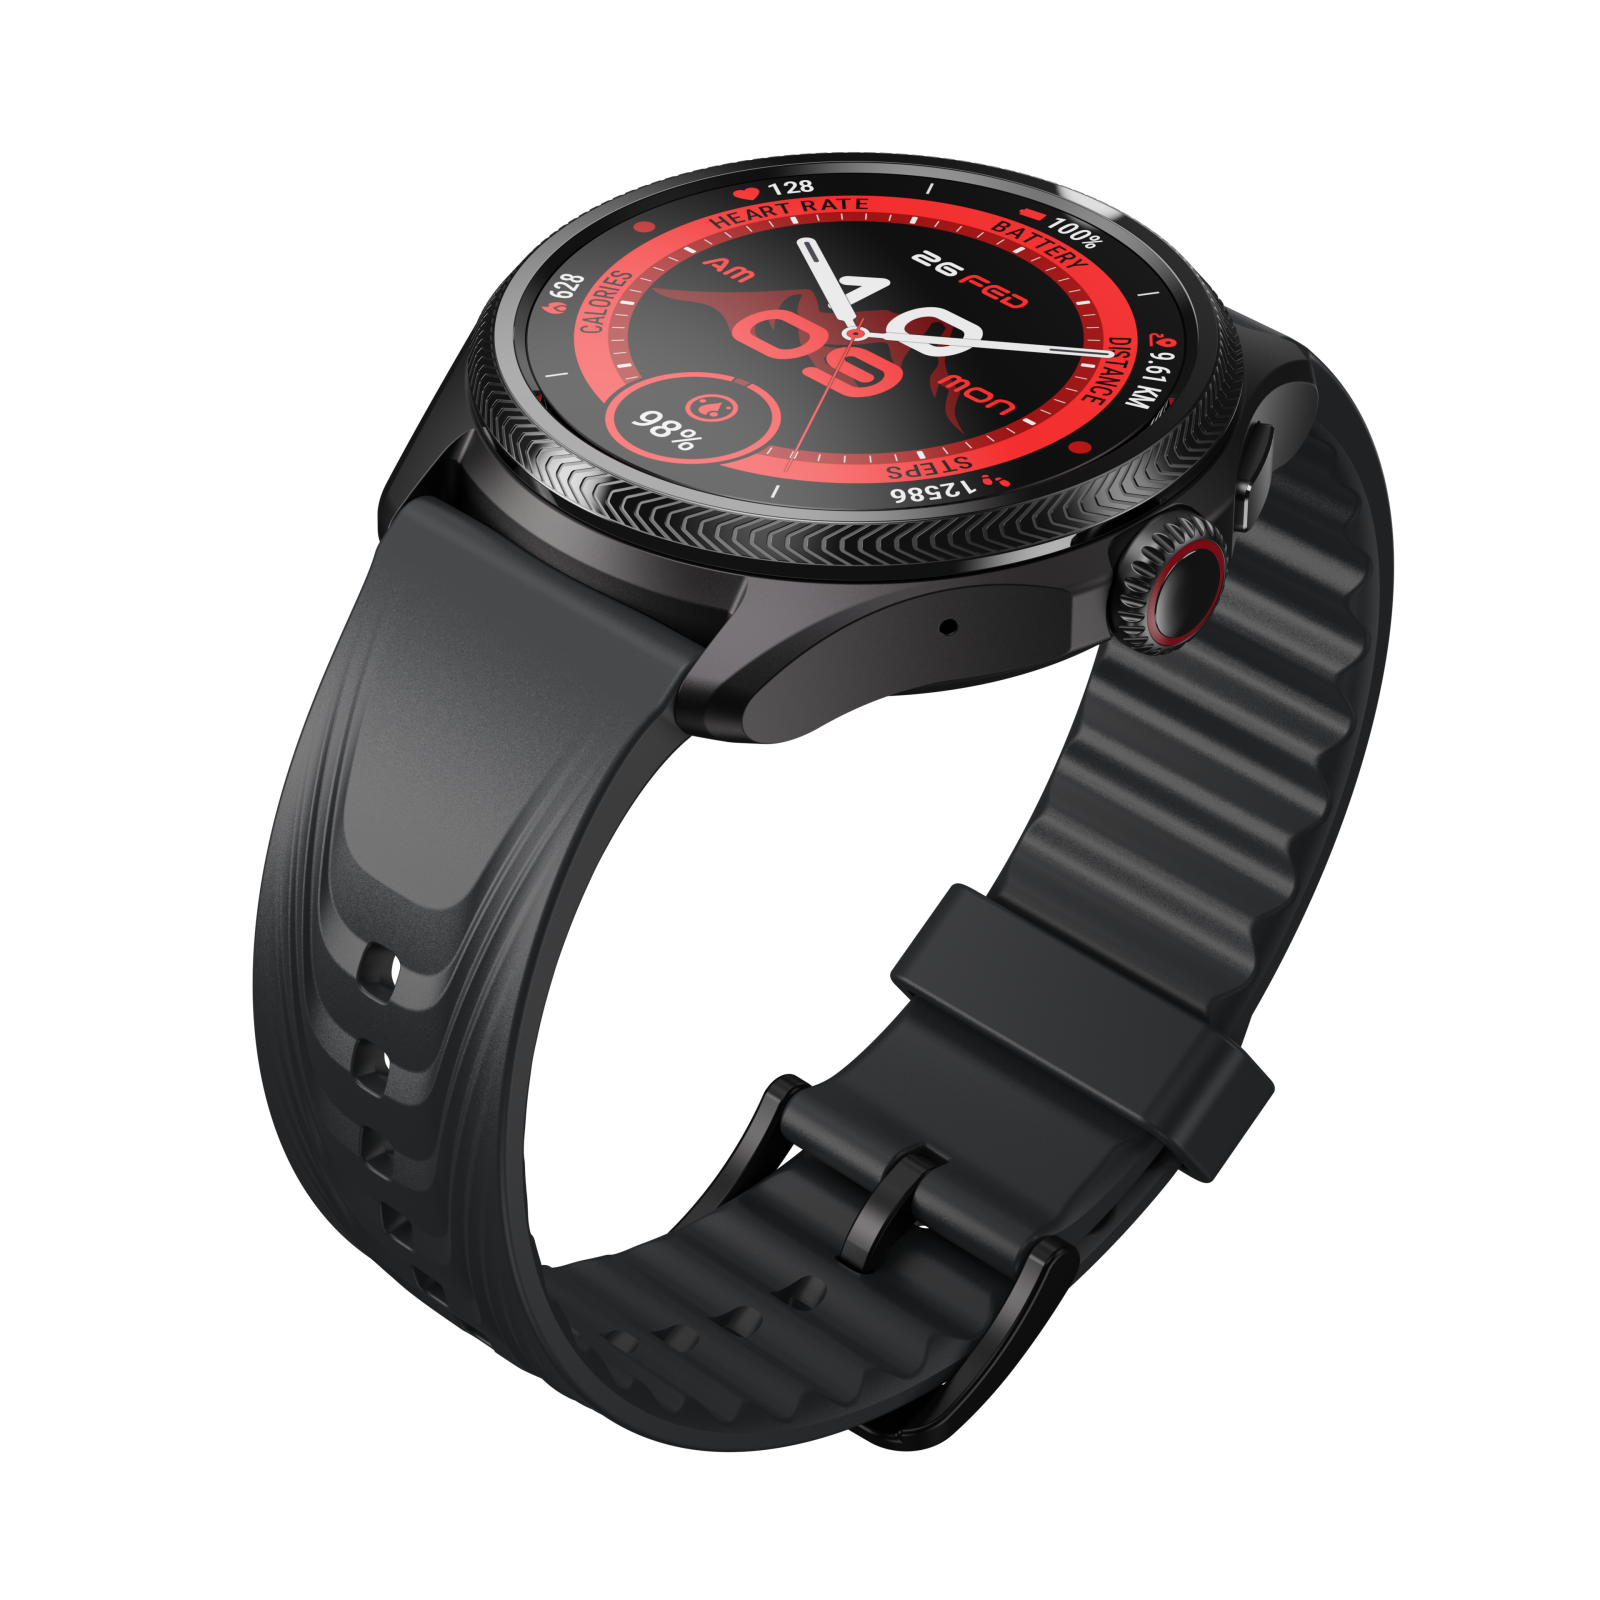 Mobvoi’s TicWatch Pro 5 Enduro is a classic watch for outdoor activities